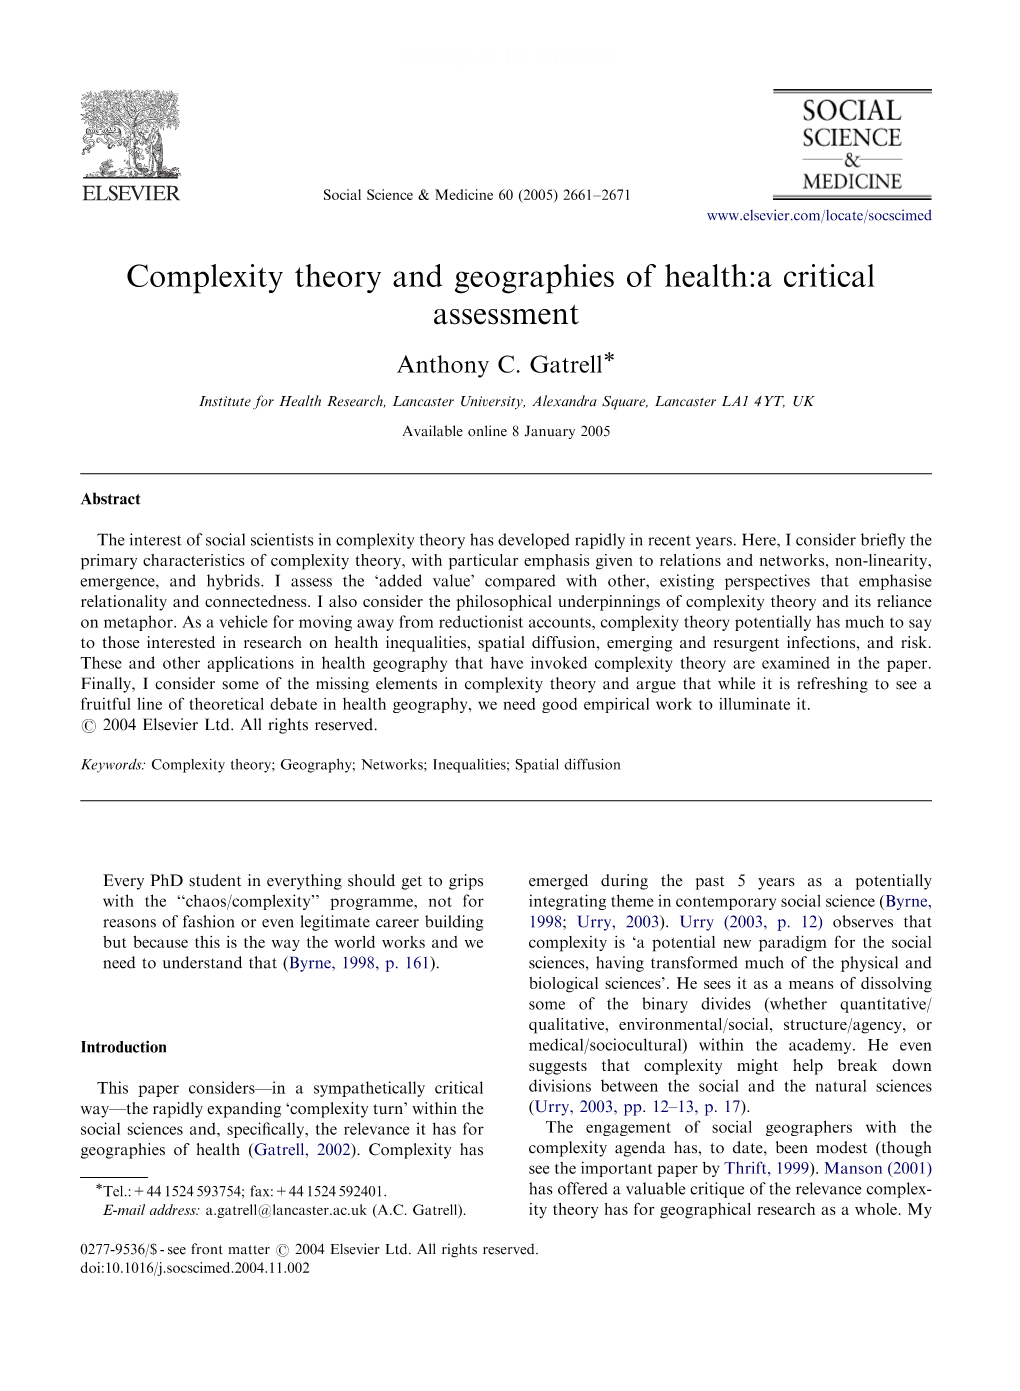 Complexity Theory and Geographies of Health: a Critical Assessment